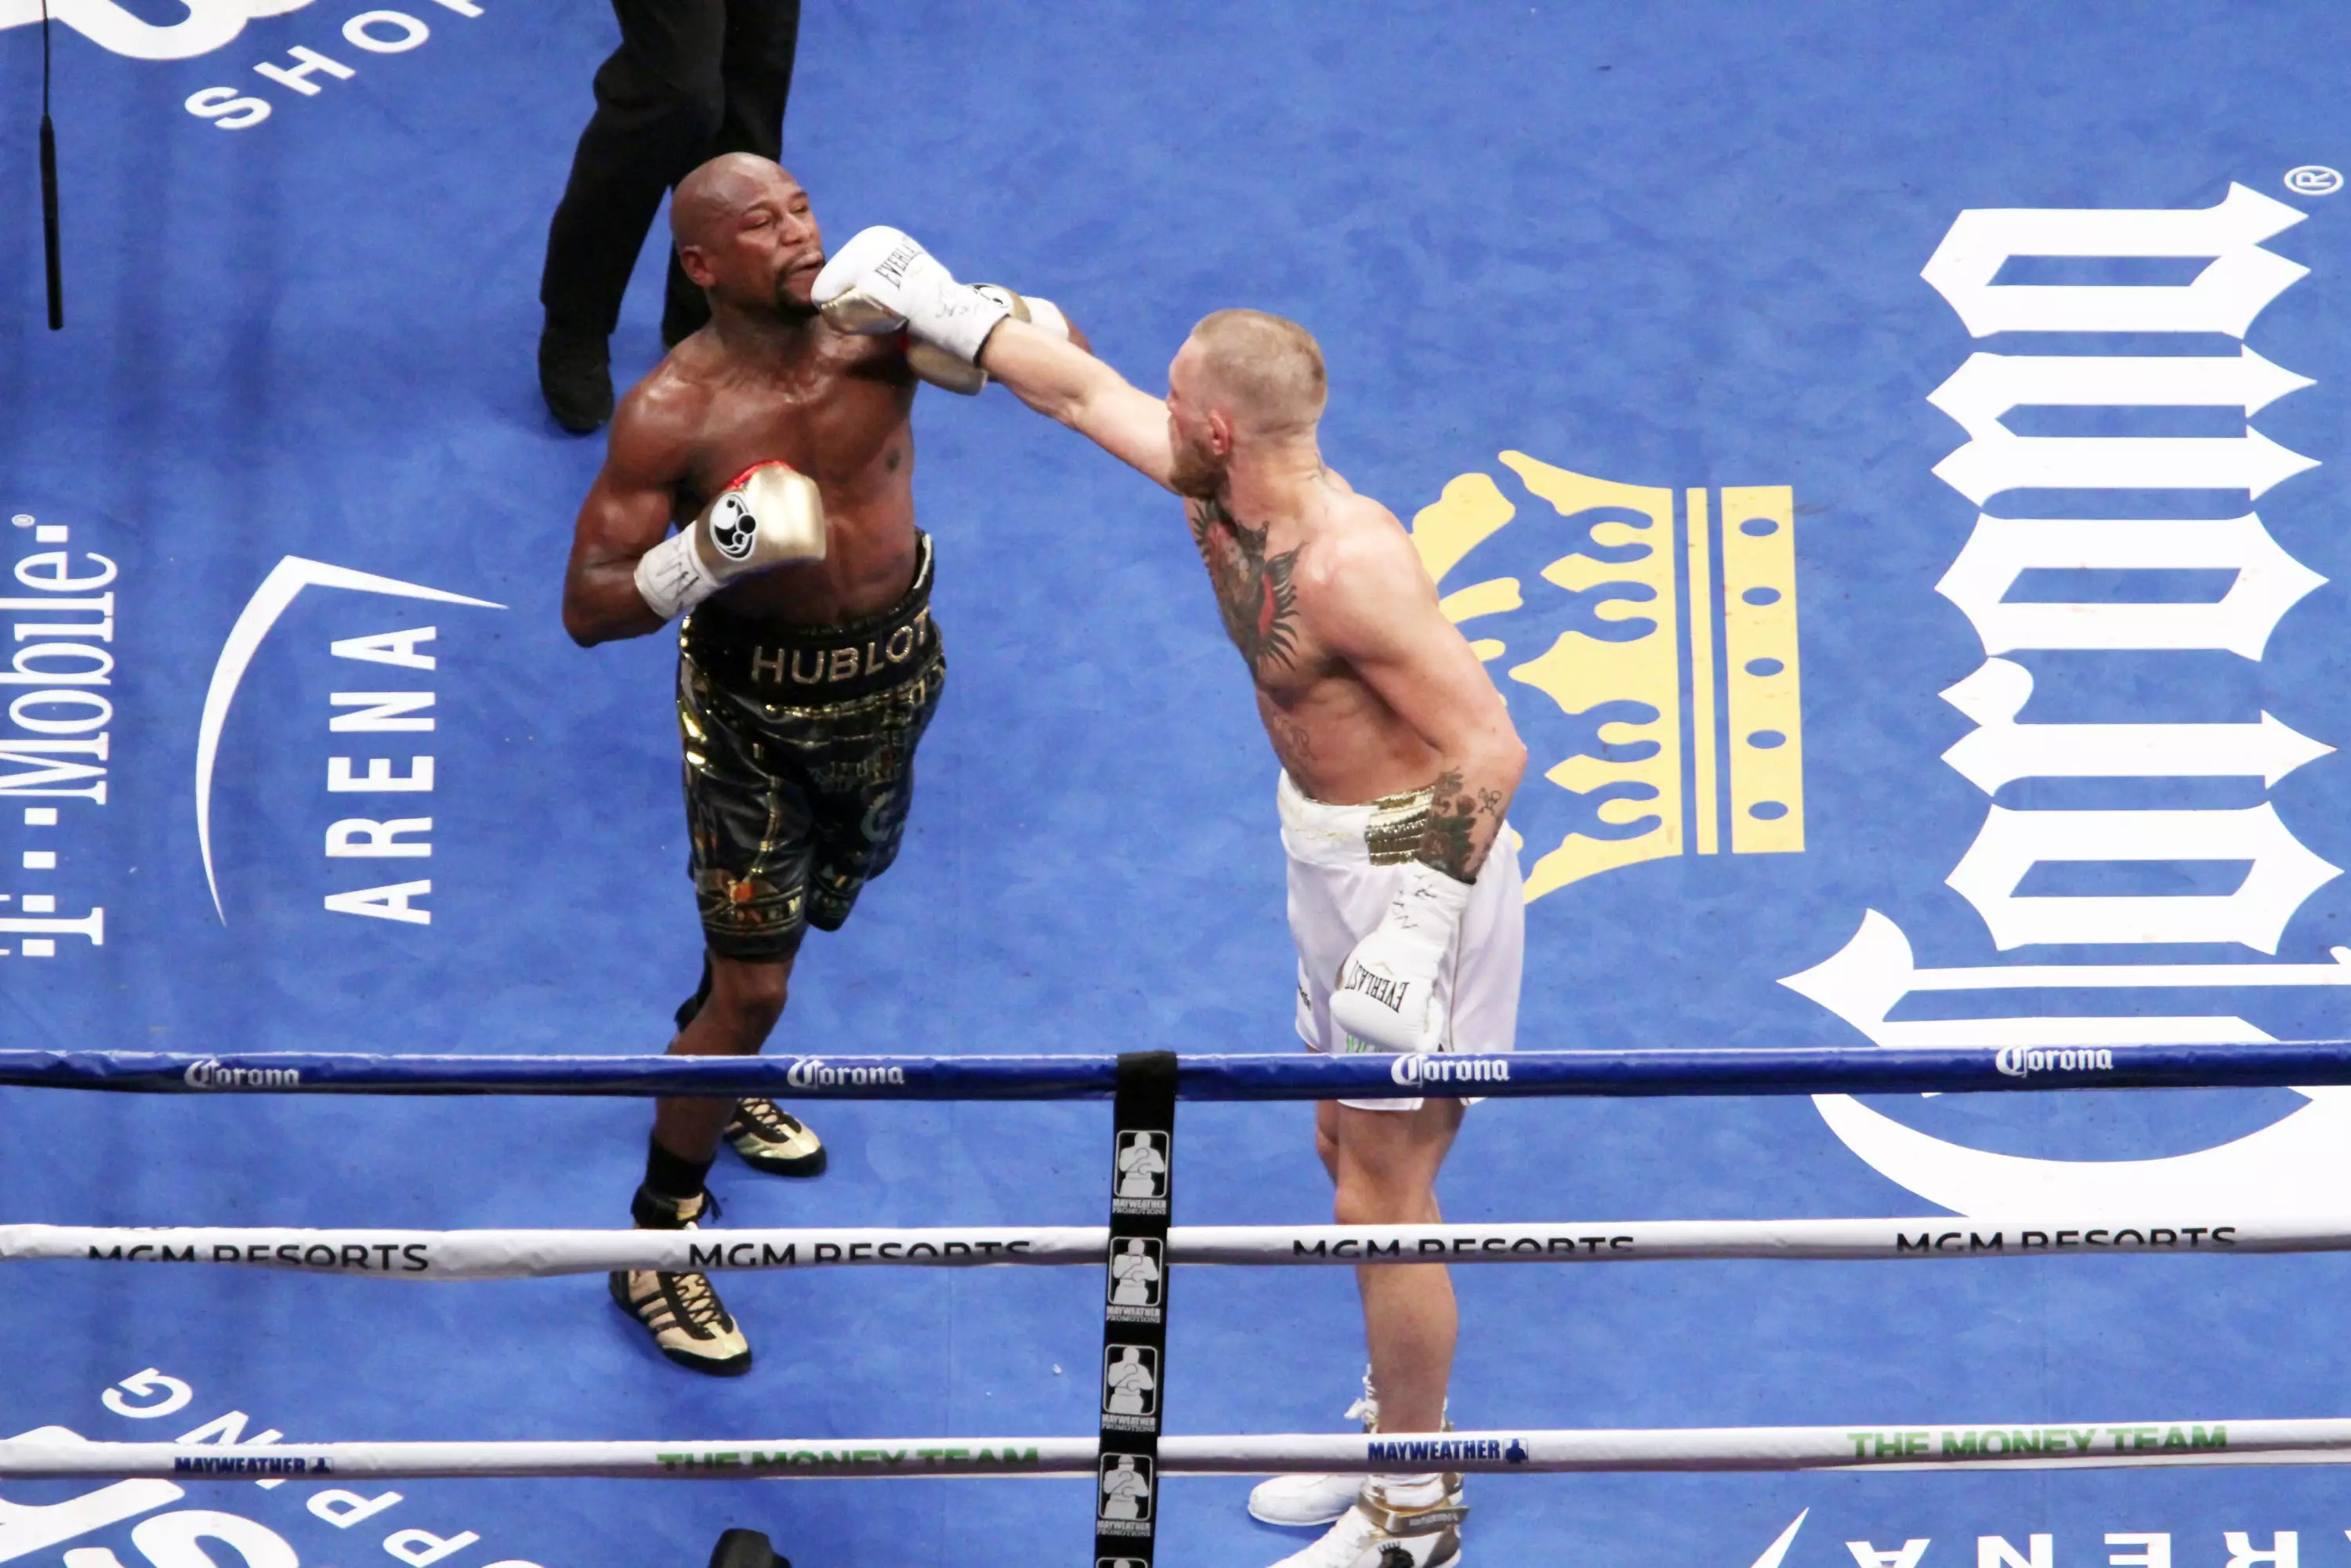 McGregor's only professional boxing fight was against McGregor. Image: PA Images